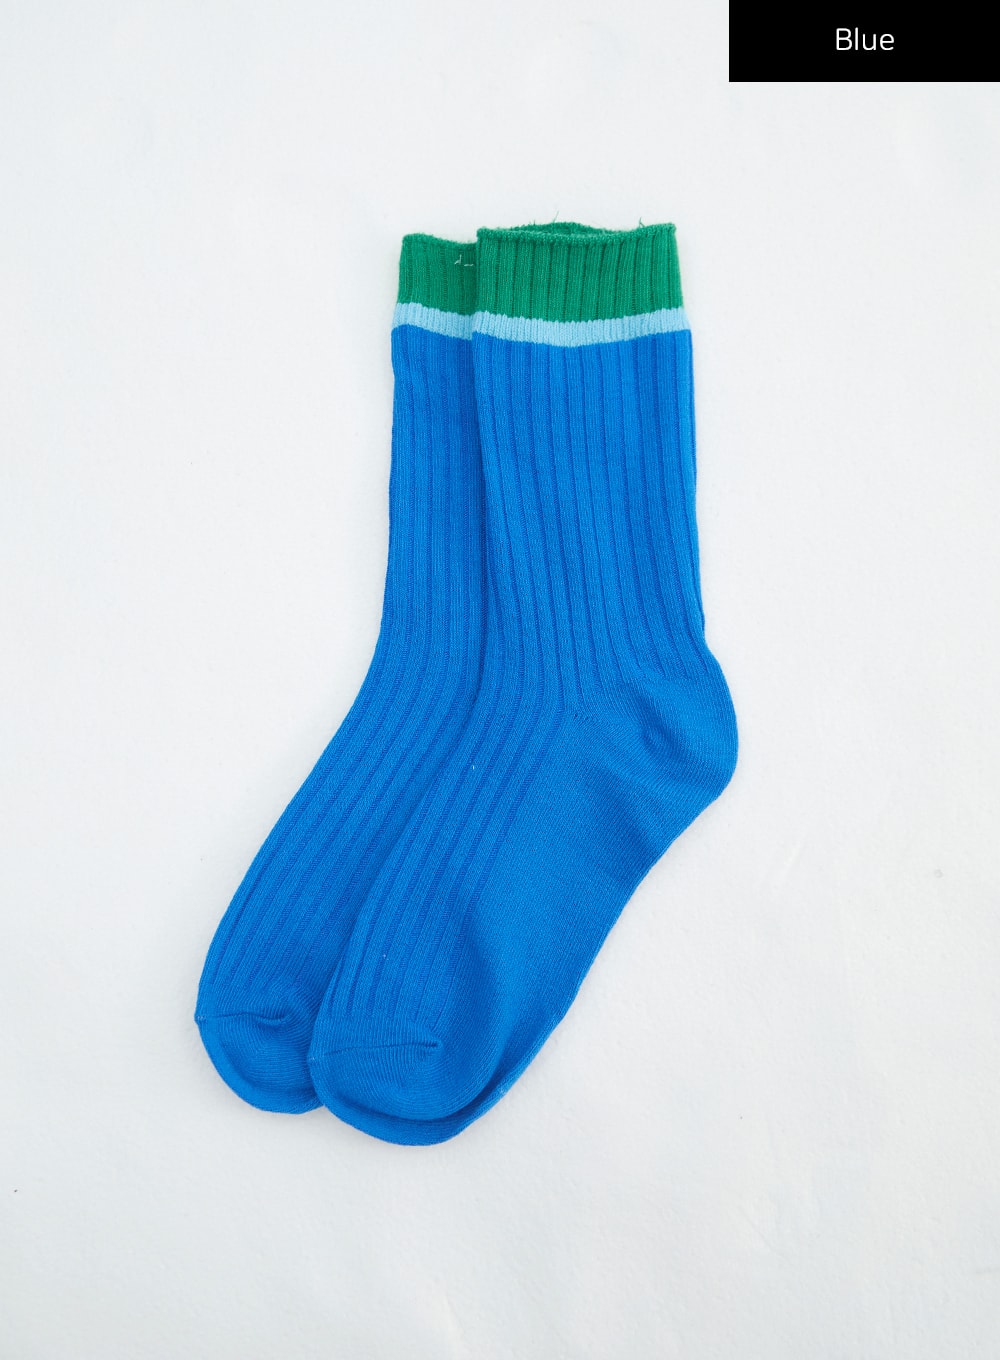 How To Block Knitted Socks and Why